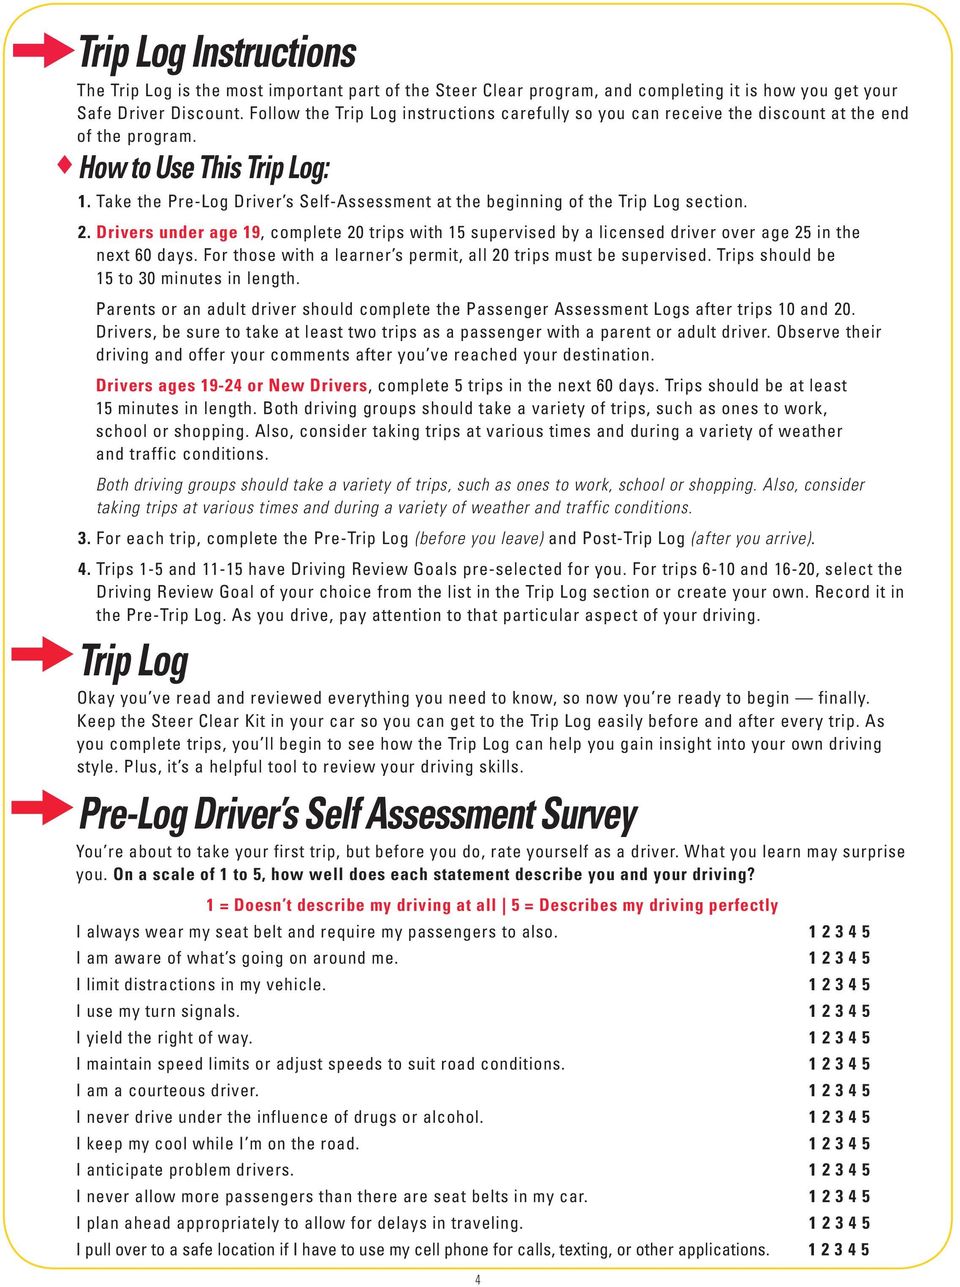 Take the Pre-Log Driver s Self-Assessment at the beginning of the Trip Log section. 2. Drivers under age 19, complete 20 trips with 15 supervised by a licensed driver over age 25 in the next 60 days.